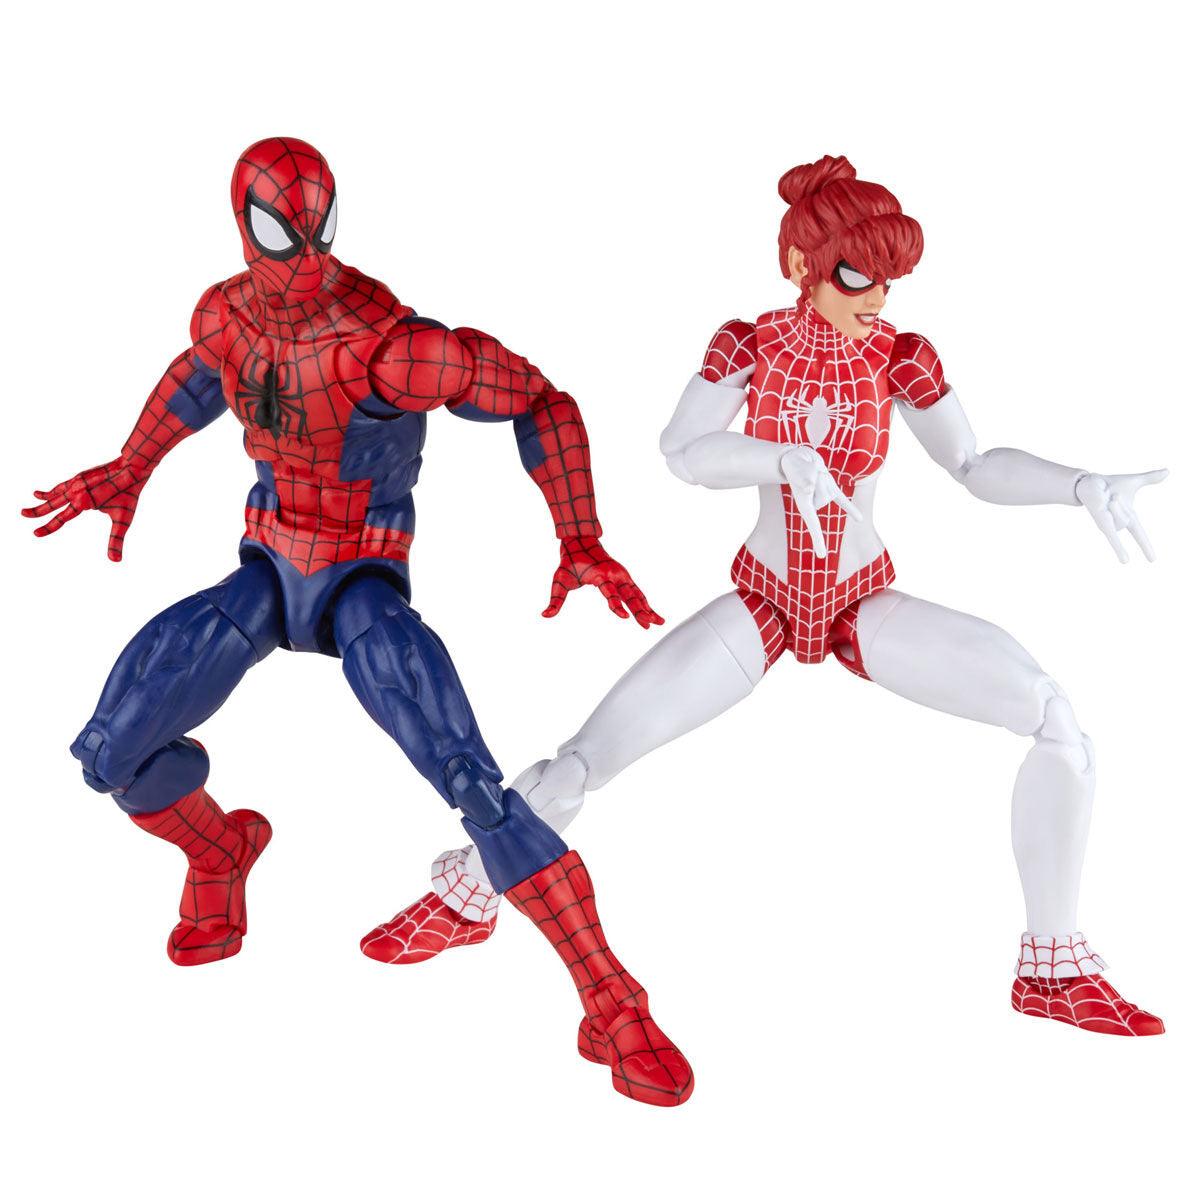 NEW?! - Marvel Legends Amazing Spider-Man First Appearance and